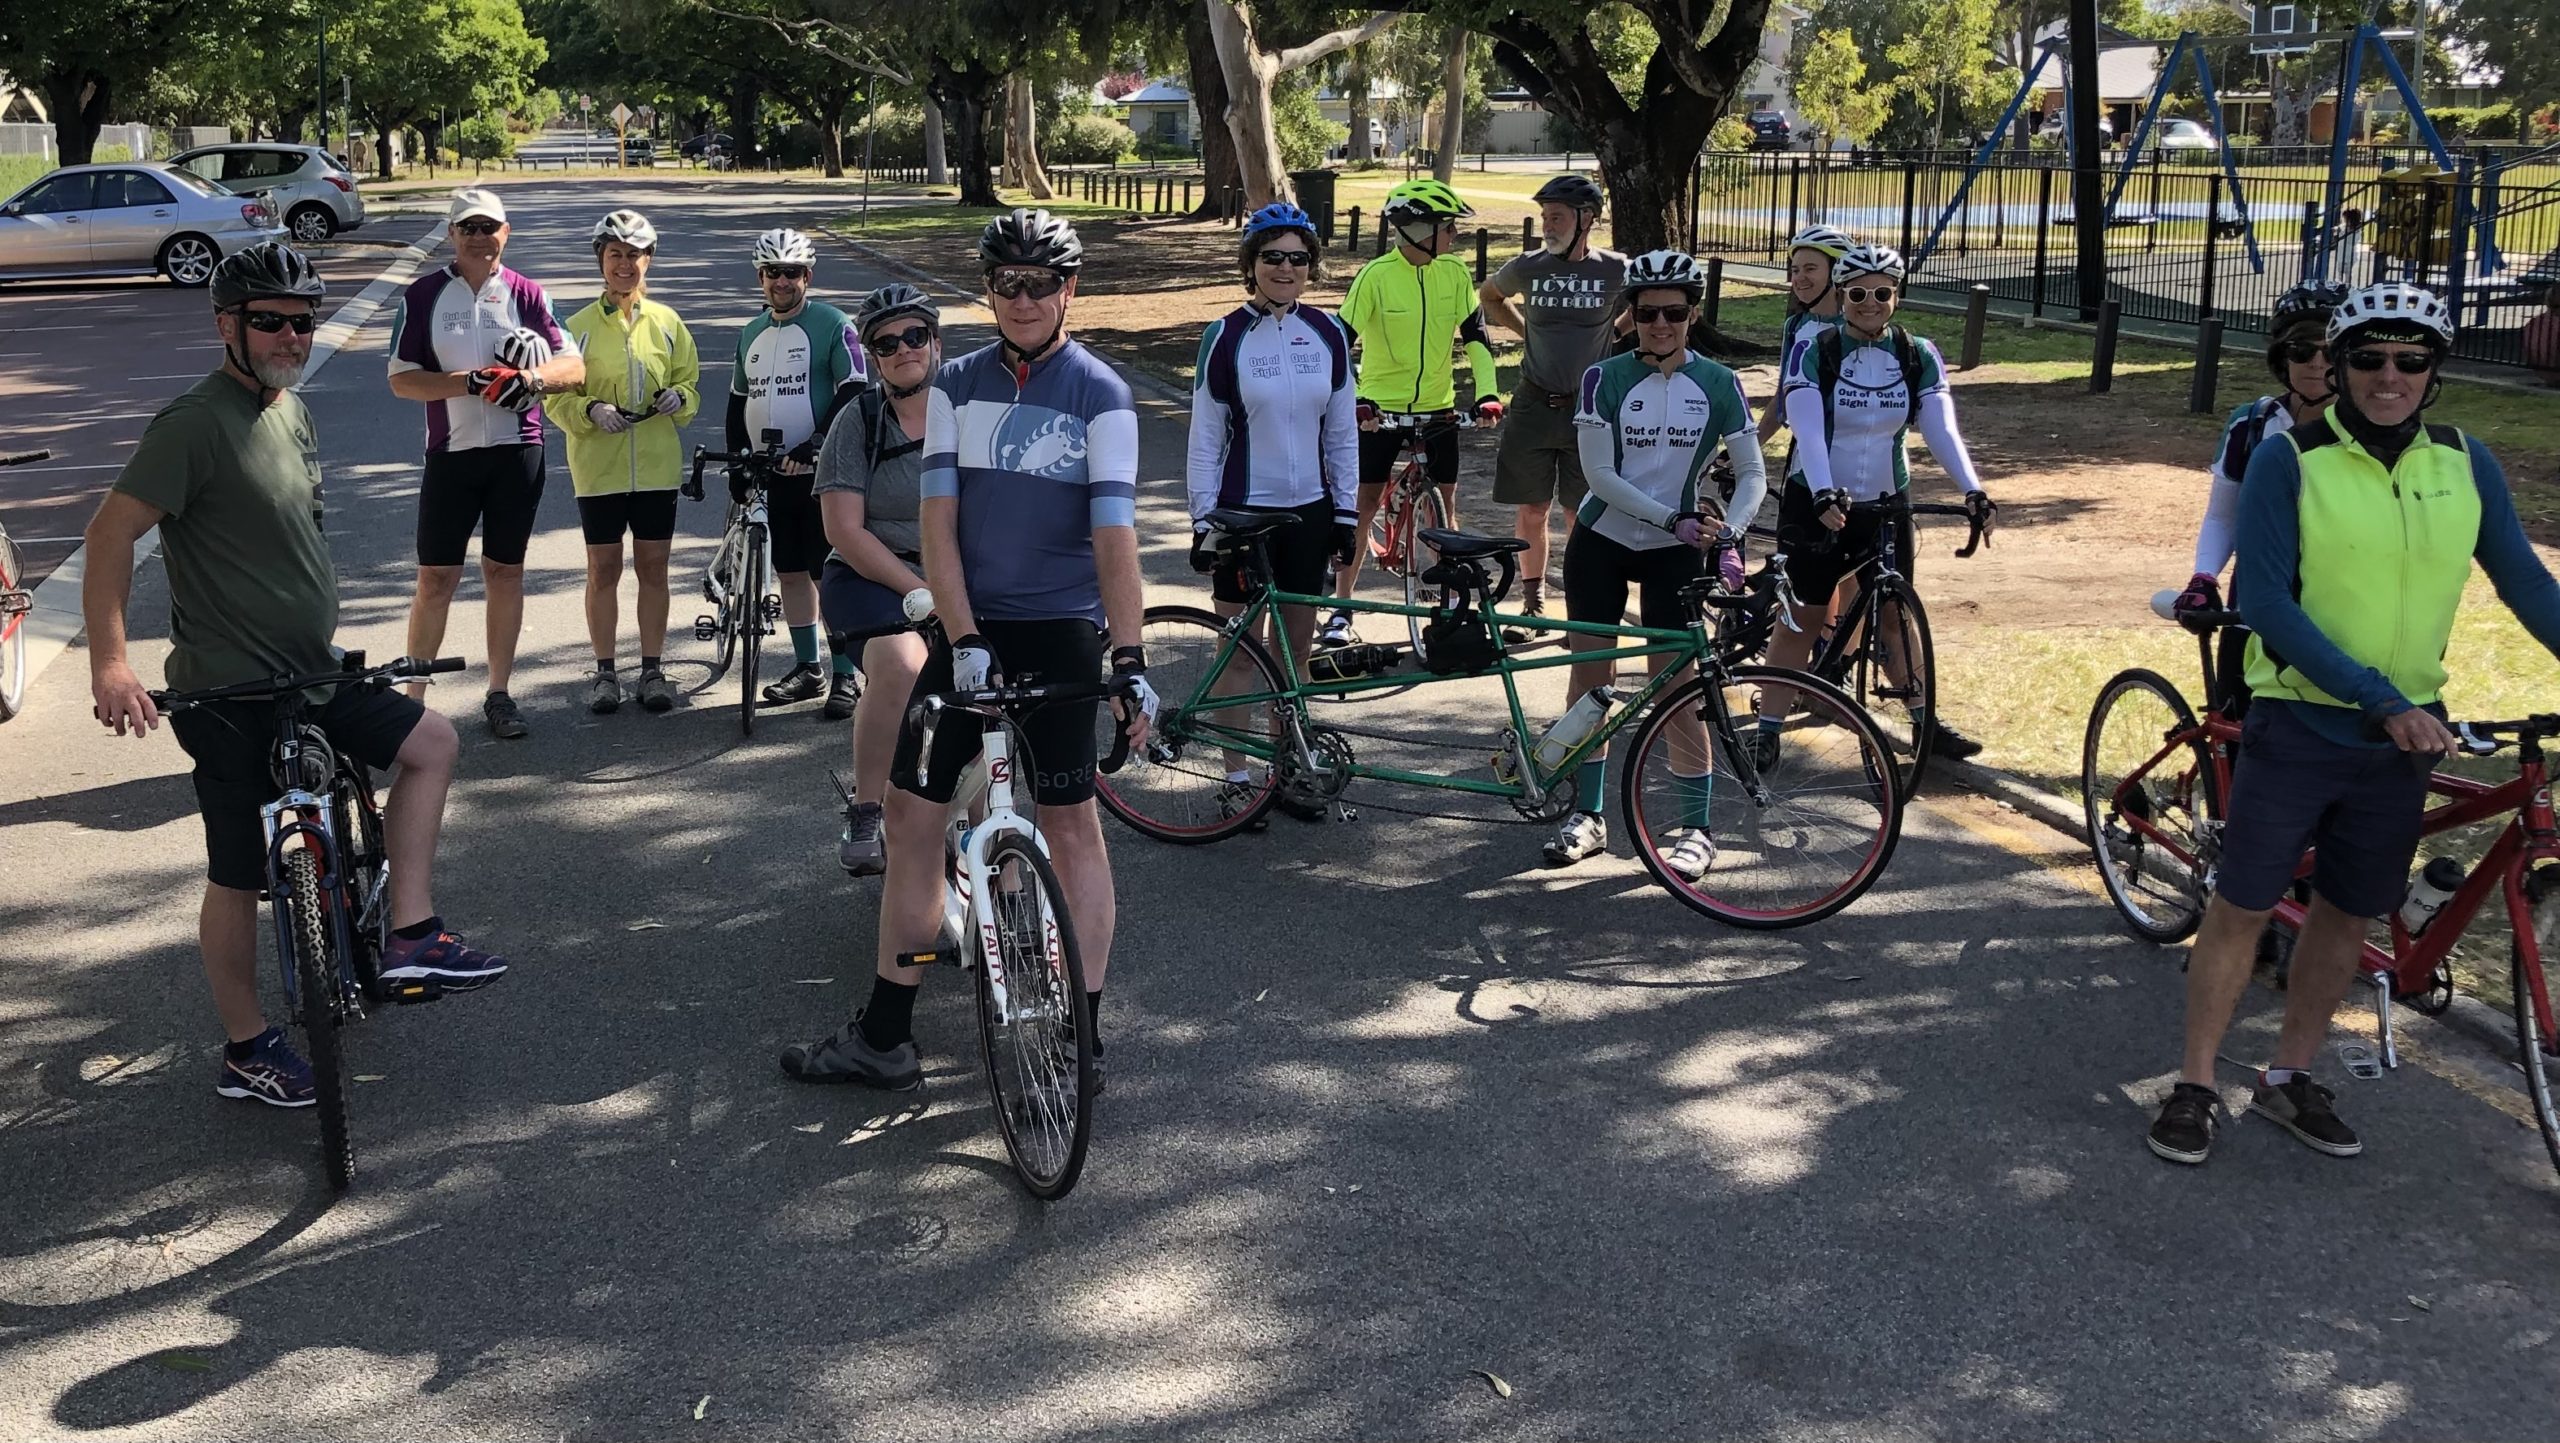 Five tandem cyclists, including 4 vision-impaired stokers, plus a number of single cyclists are gathered together on a side road in Lathlain before departing on the 25km ride around southern suburbs, along bike paths and quiet streets.